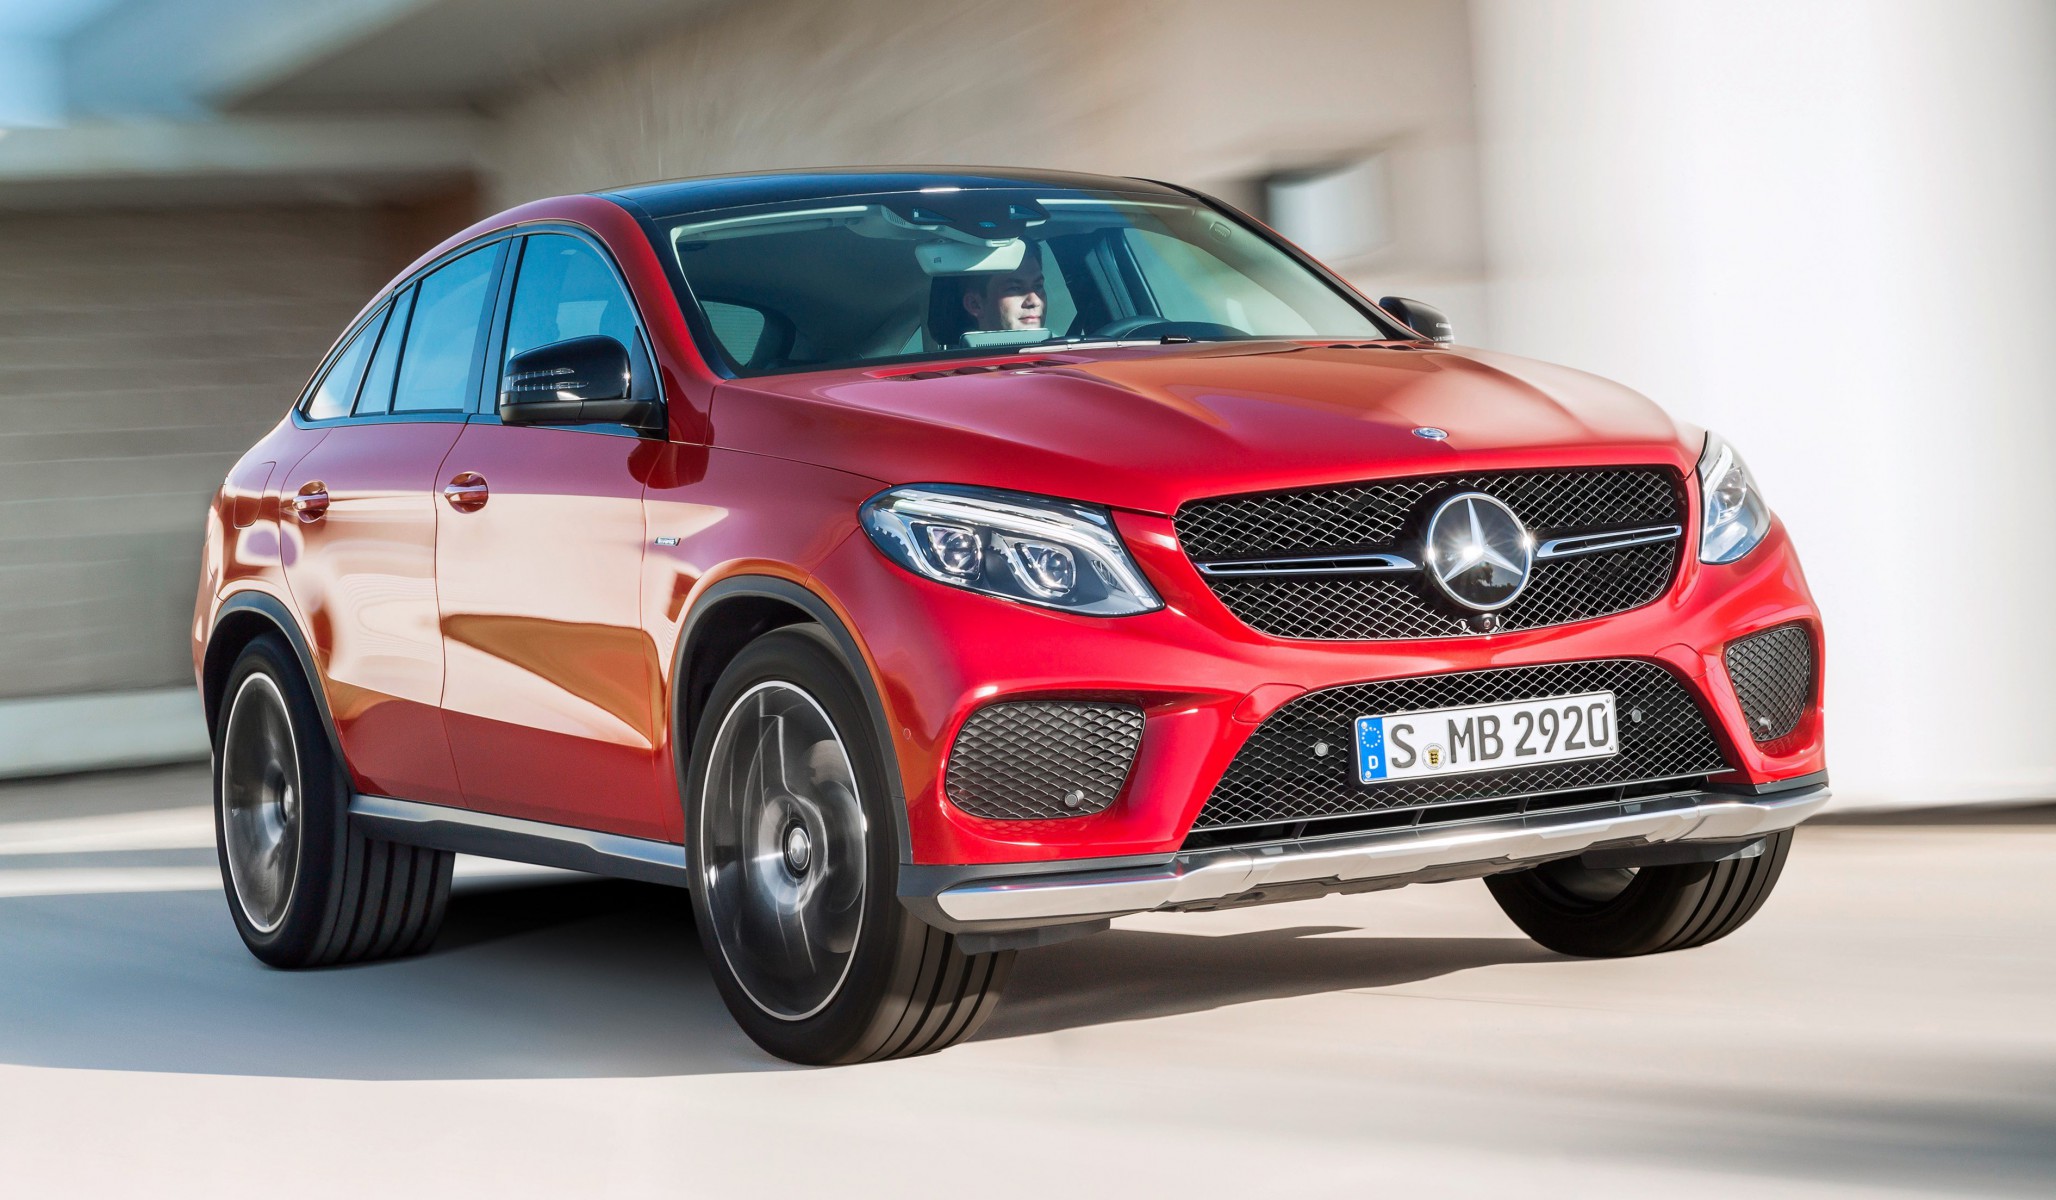 The Mercedes AMG GLE Coupe has a price tag starting at 65k